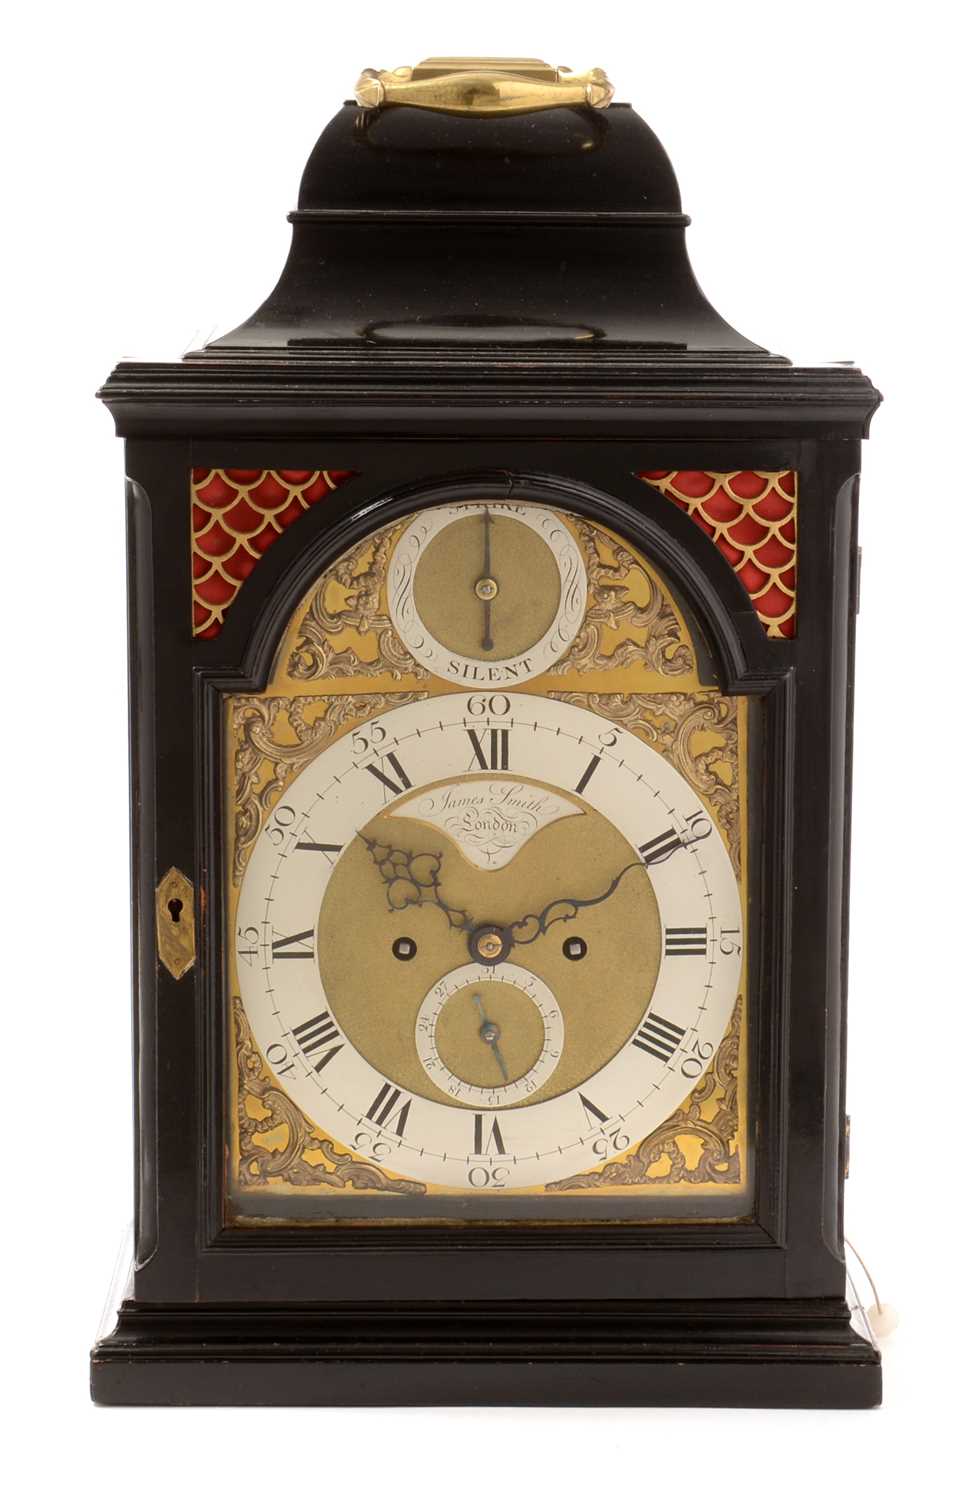 Lot 474 - An George III ebonised repeating bracket clock, by James Smith, London, verge escapement